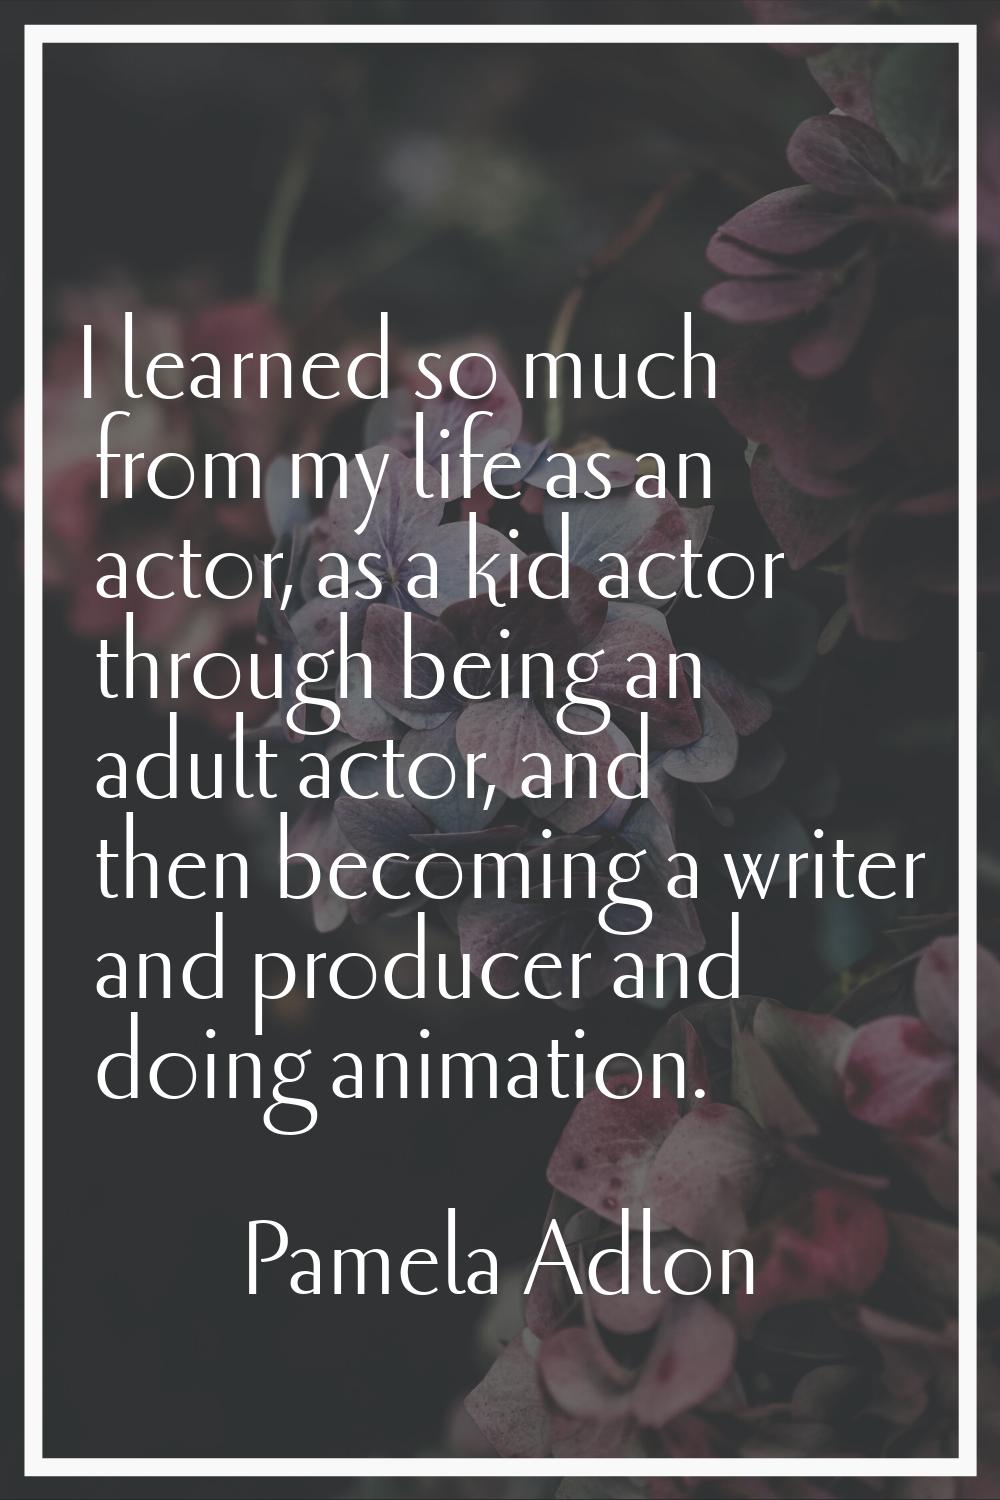 I learned so much from my life as an actor, as a kid actor through being an adult actor, and then b